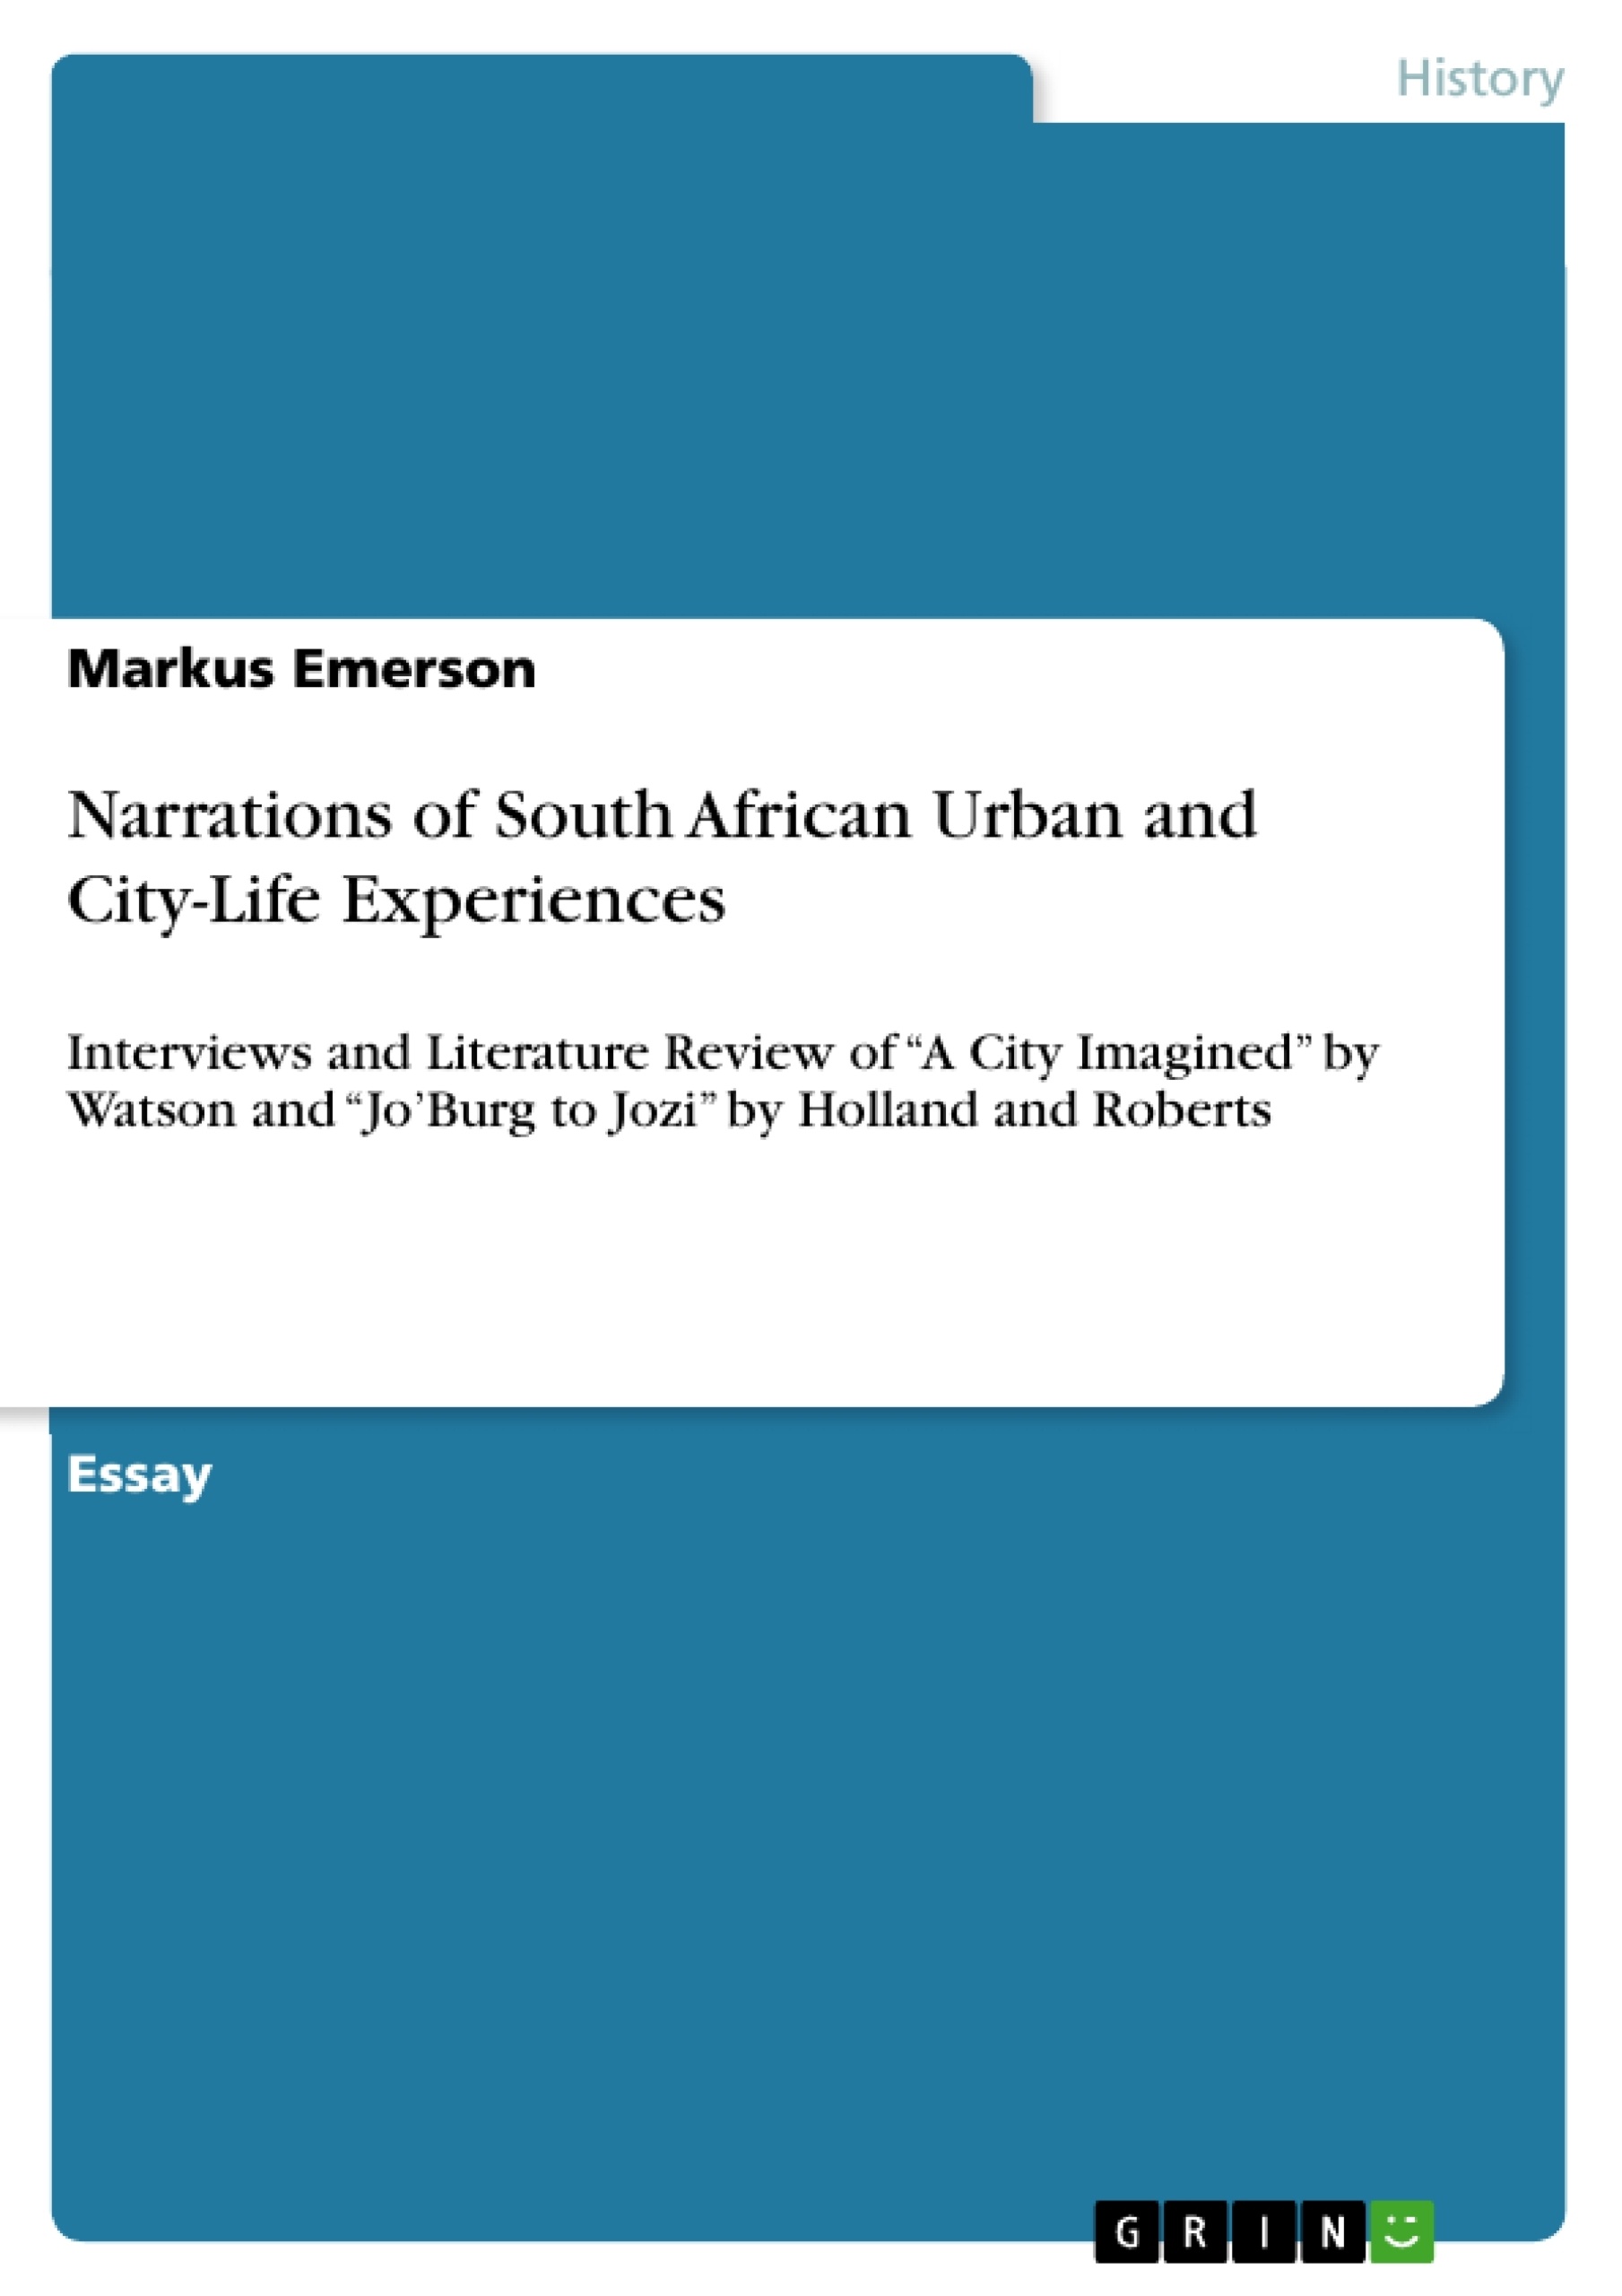 Titre: Narrations of South African Urban and City-Life Experiences